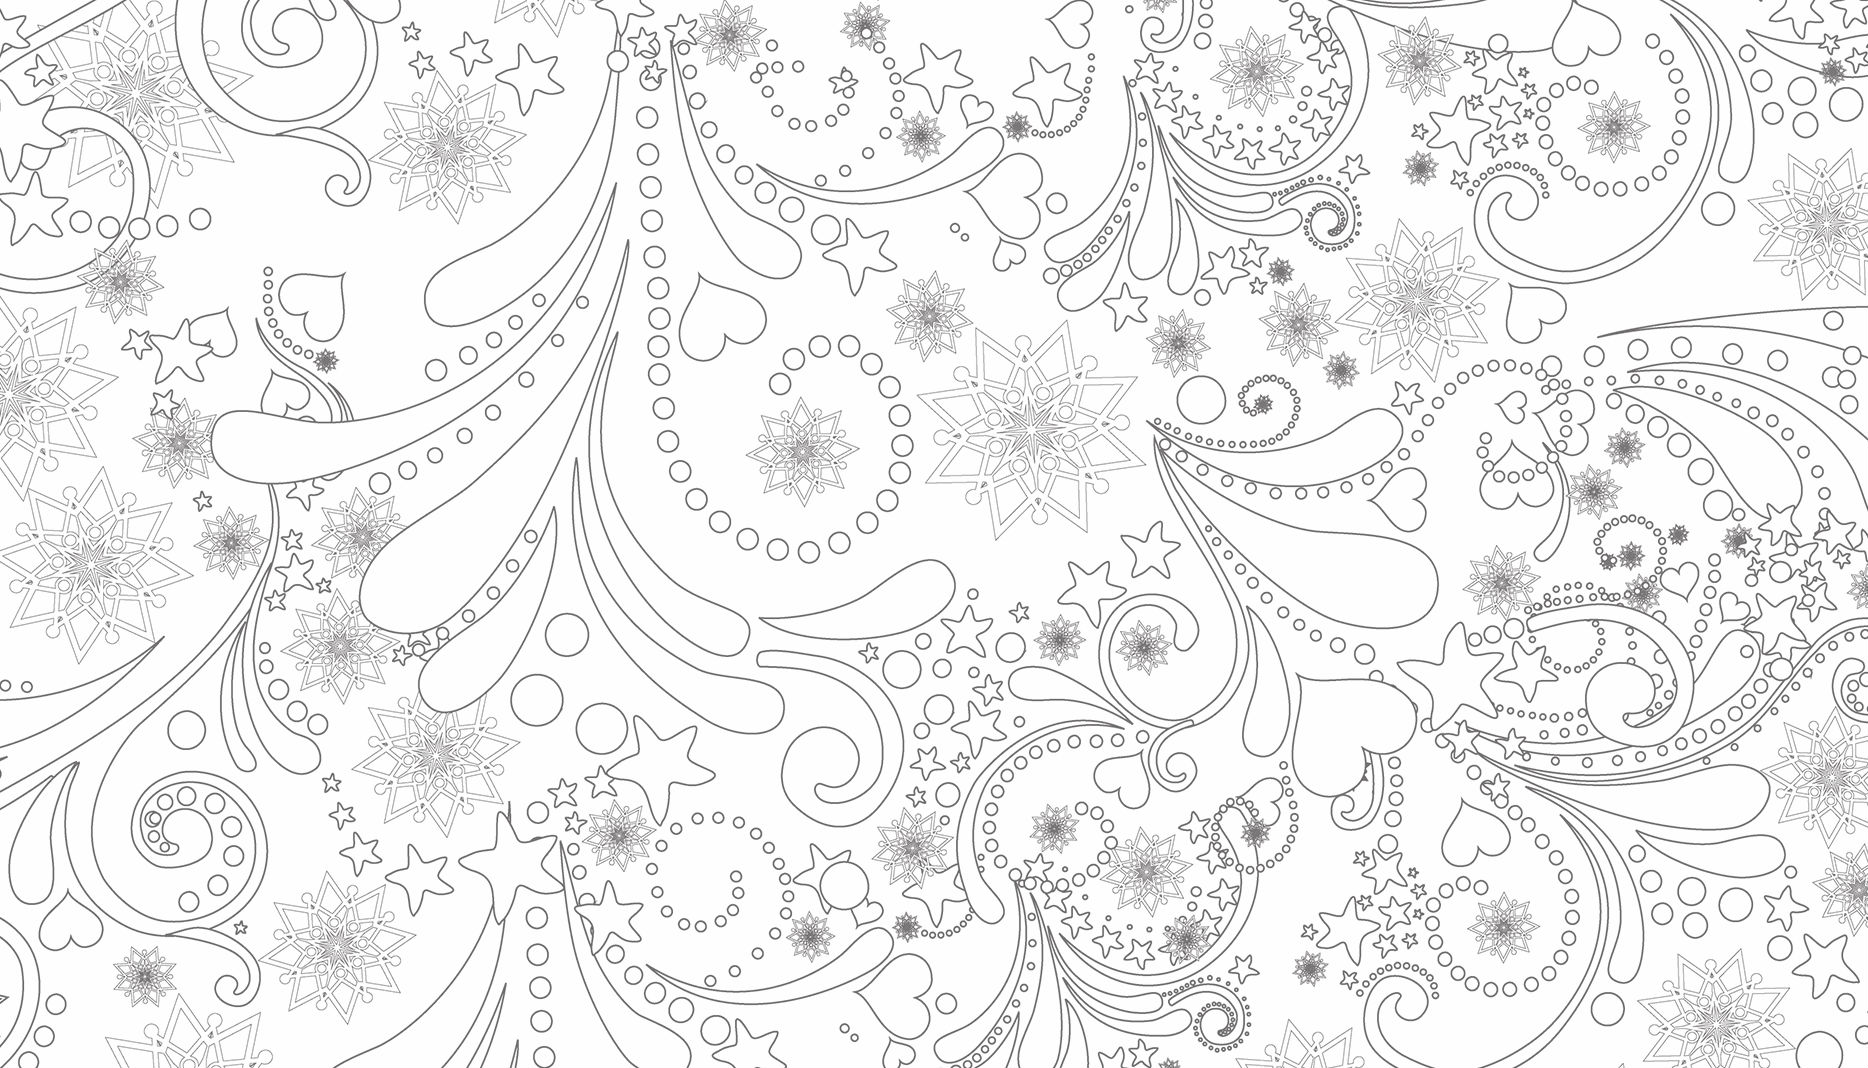 Abstract Adult Coloring Ebook by Whytes colouring Books/coloring